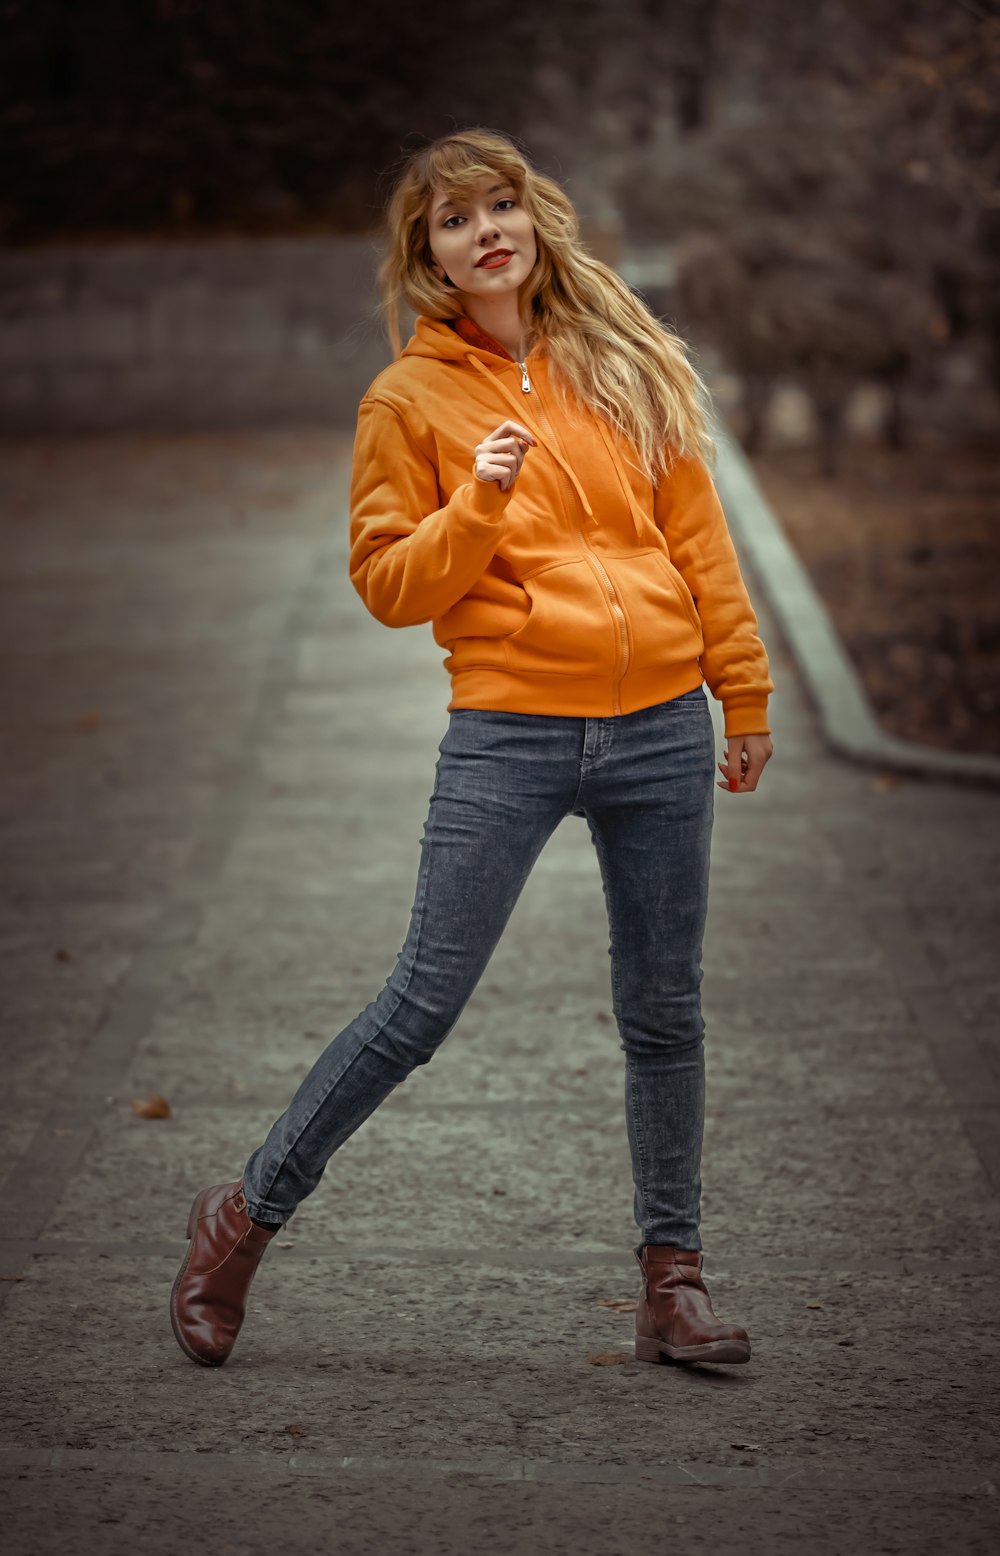 woman in orange jacket and blue jeans standing outdoors